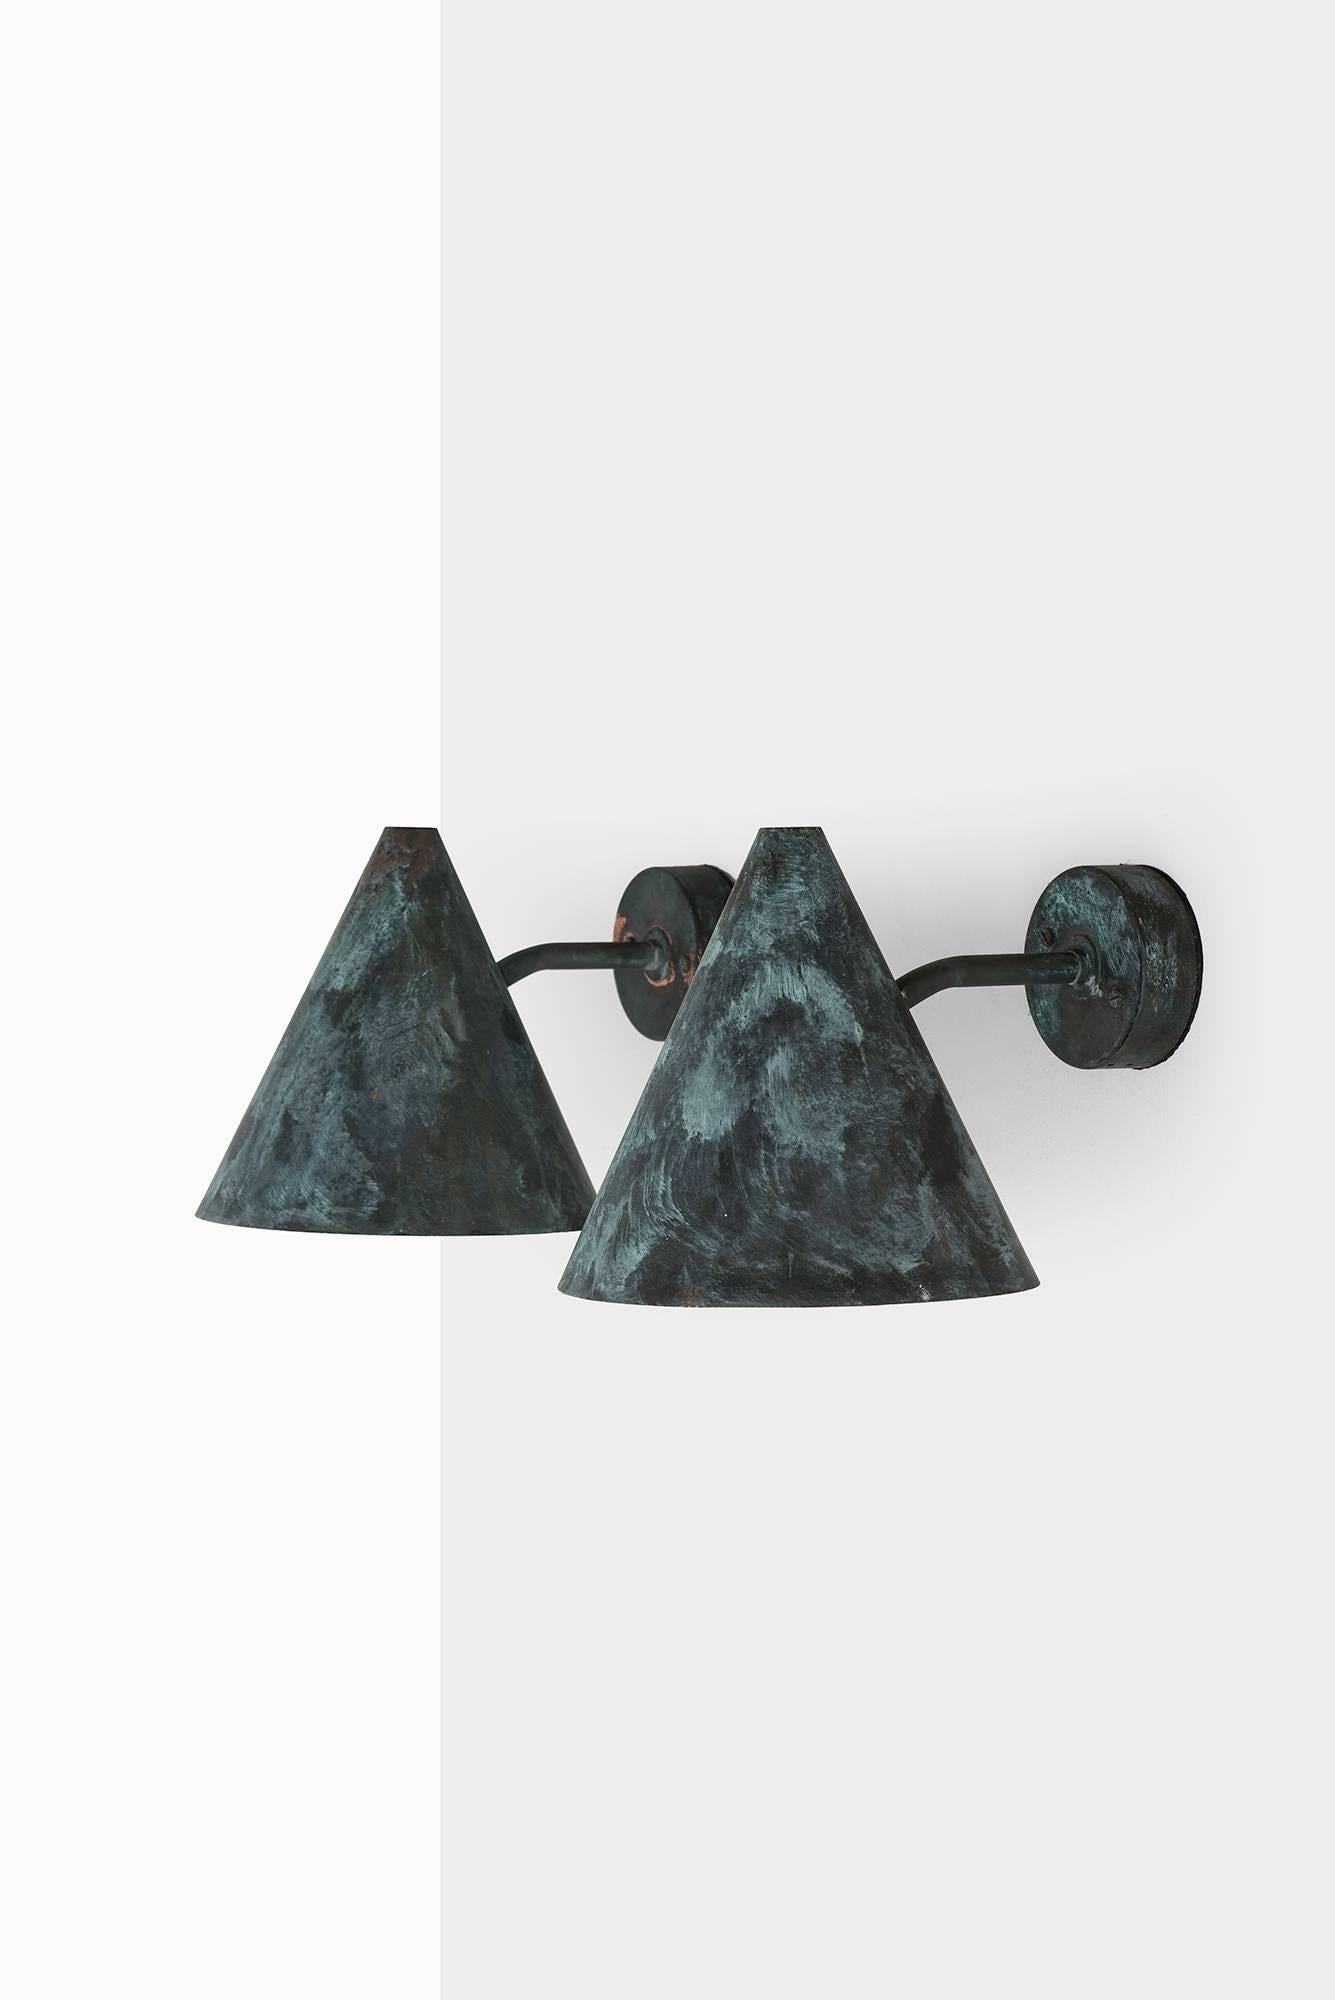 Outdoor pair of wall lamps model Tratten designed by Hans-Agne Jakobsson. Produced by Hans-Agne Jakobsson AB in Markaryd, Sweden.